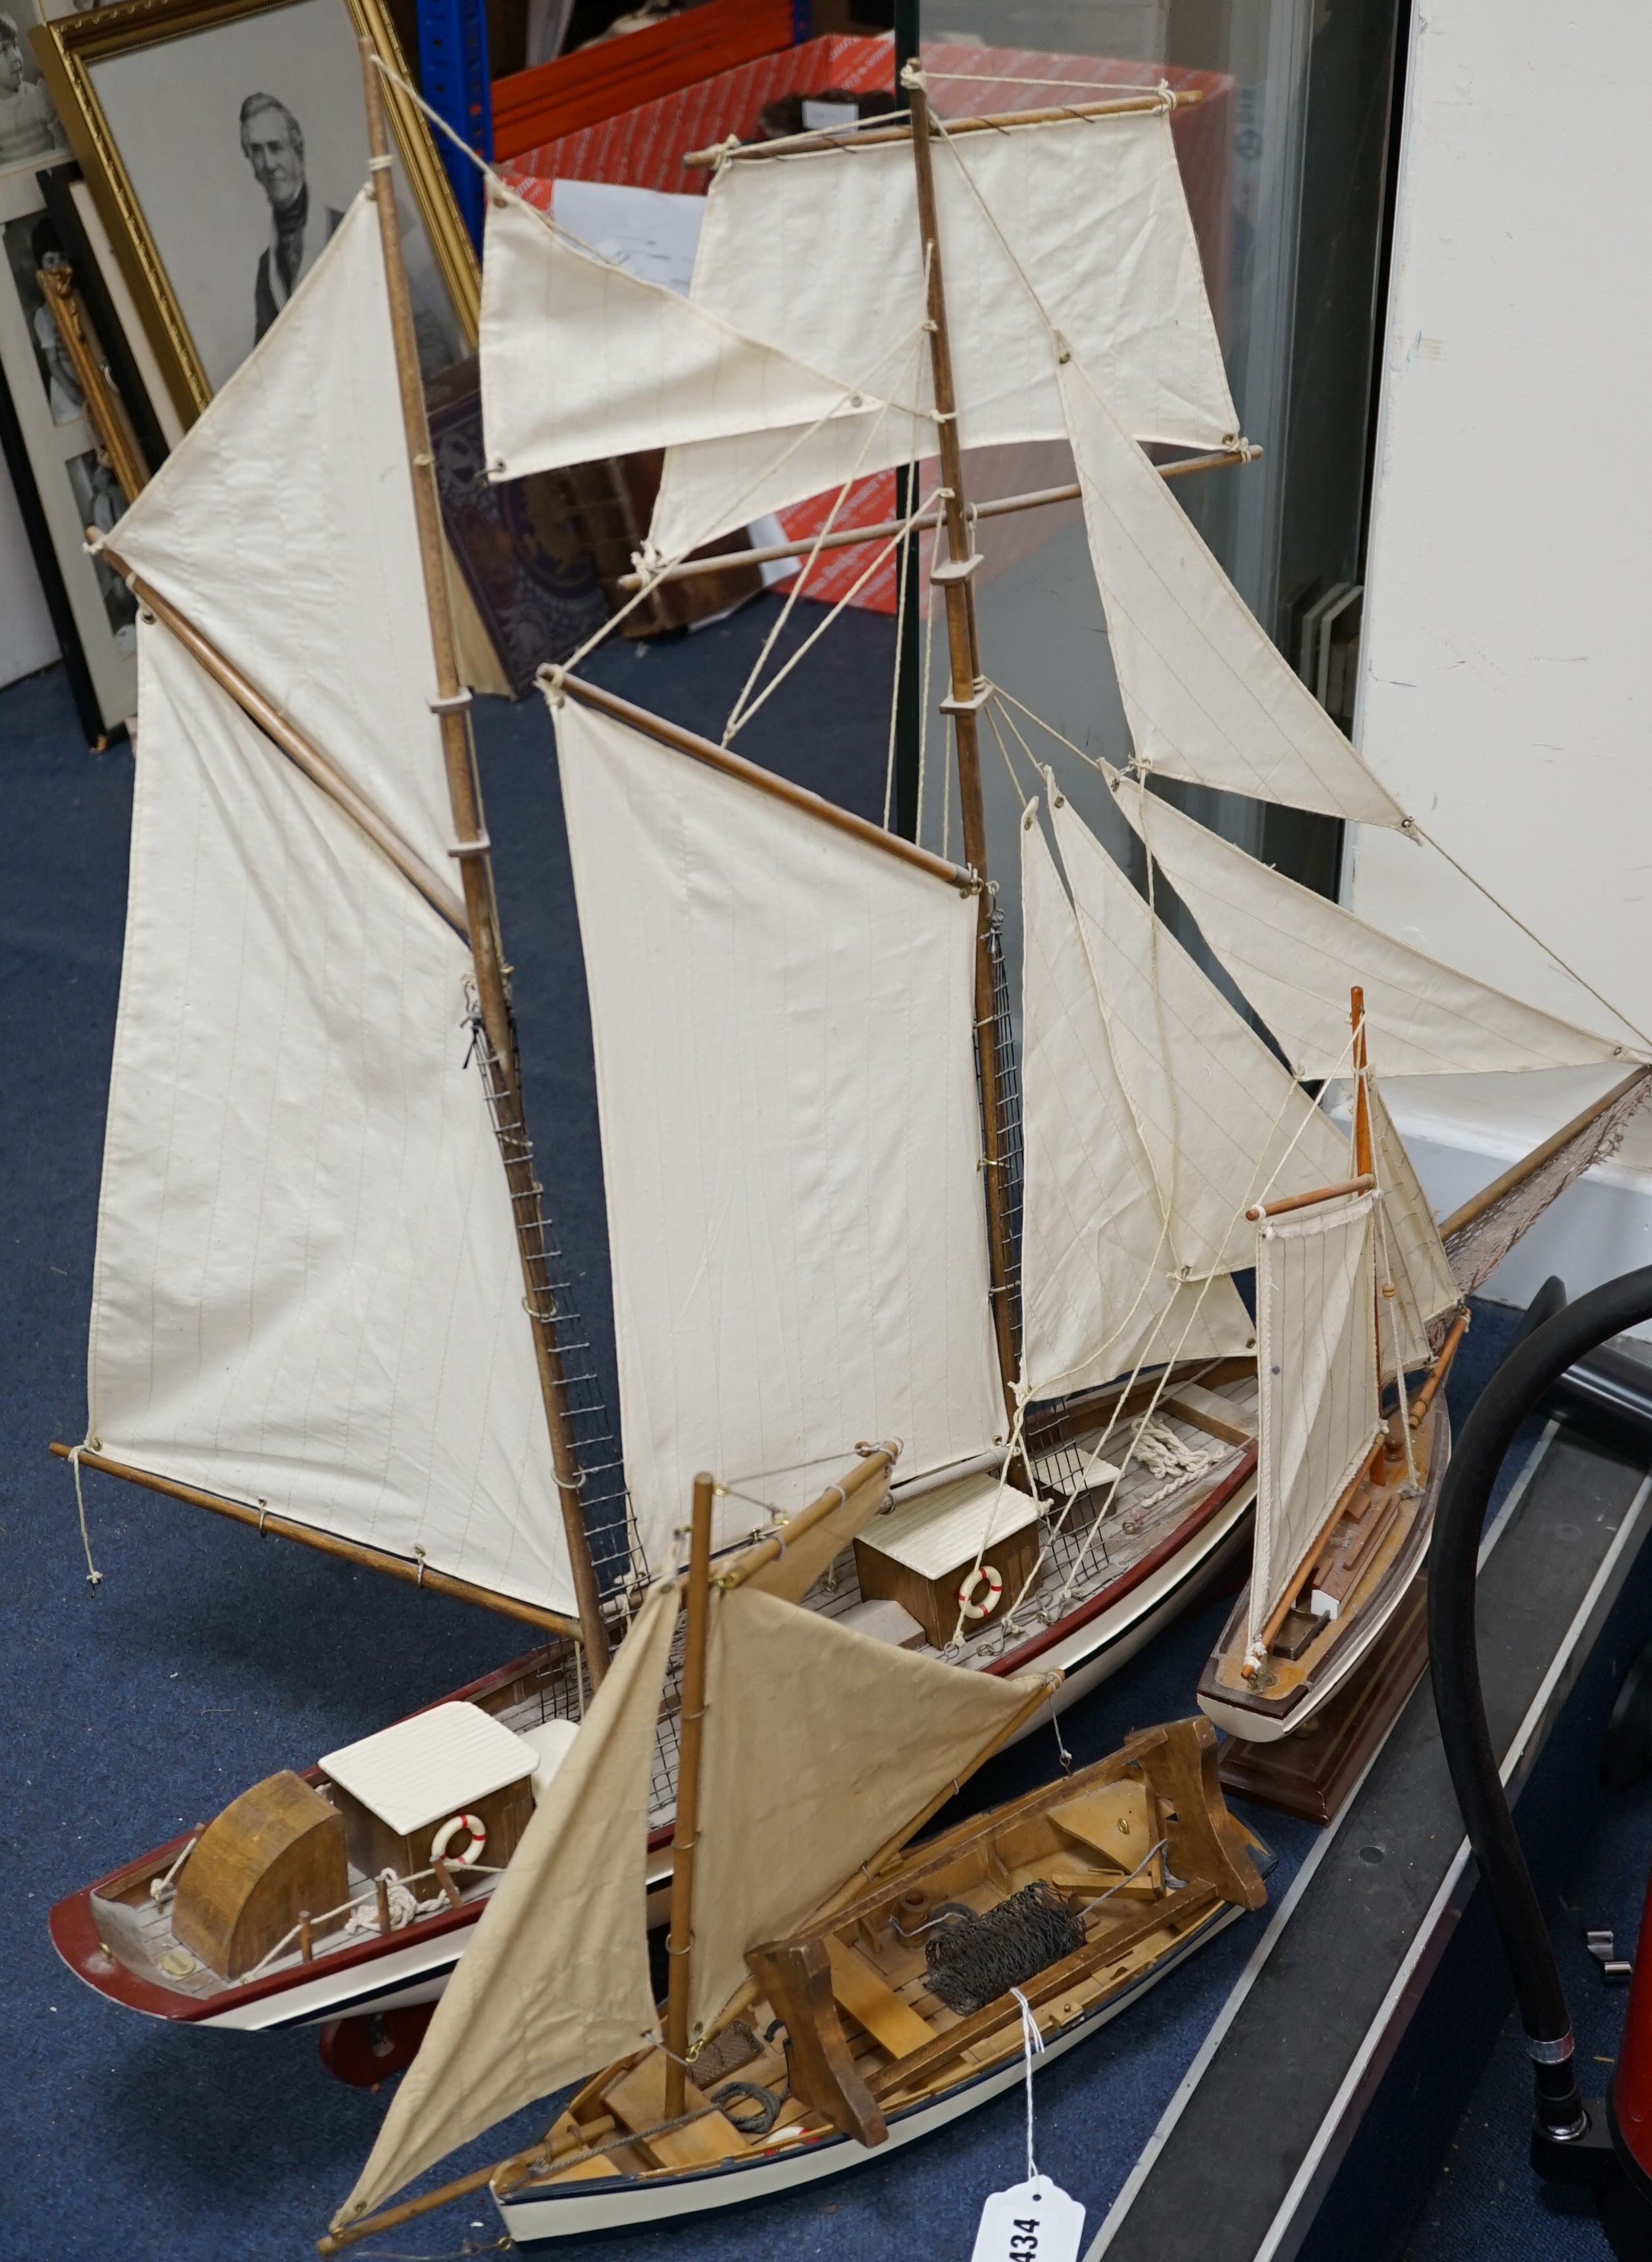 'Belle Poule' a model boat, with 2 others